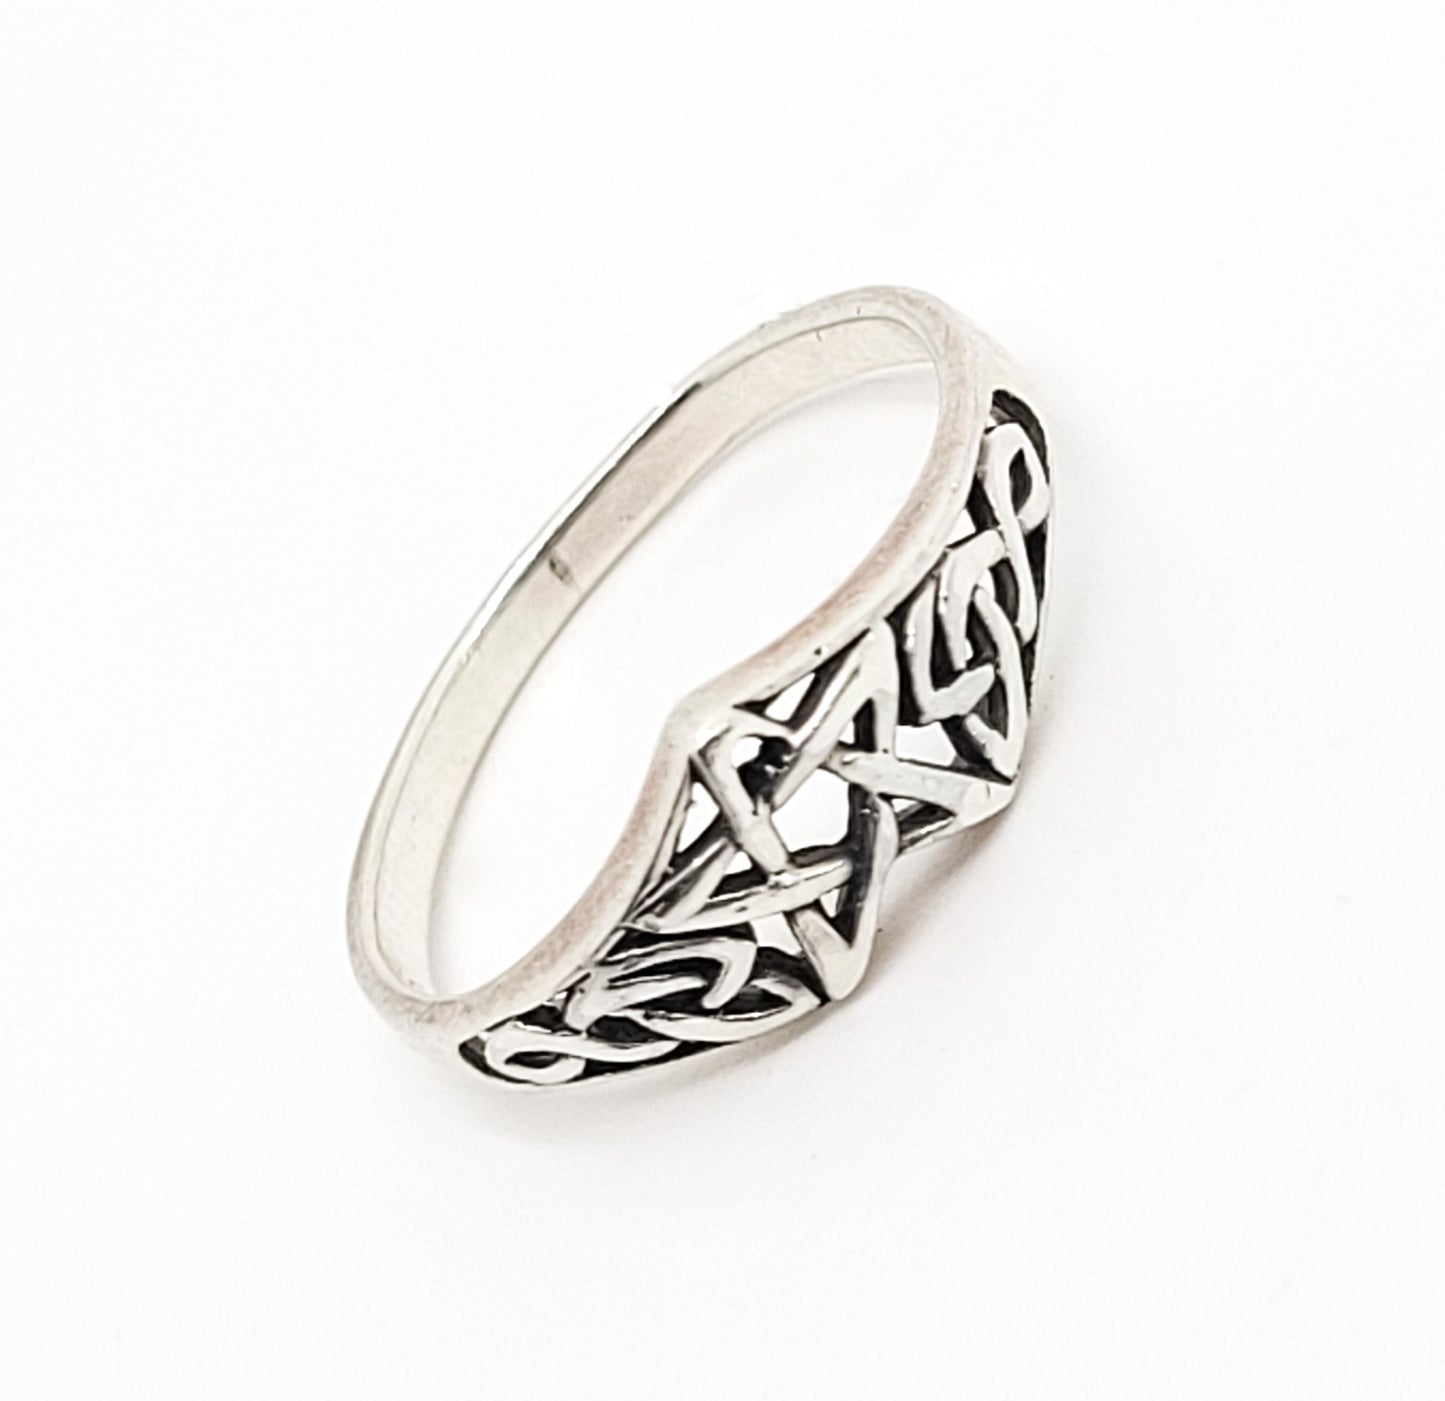 Star pentacle Celtic infinity knot vintage sterling silver band ring size 8